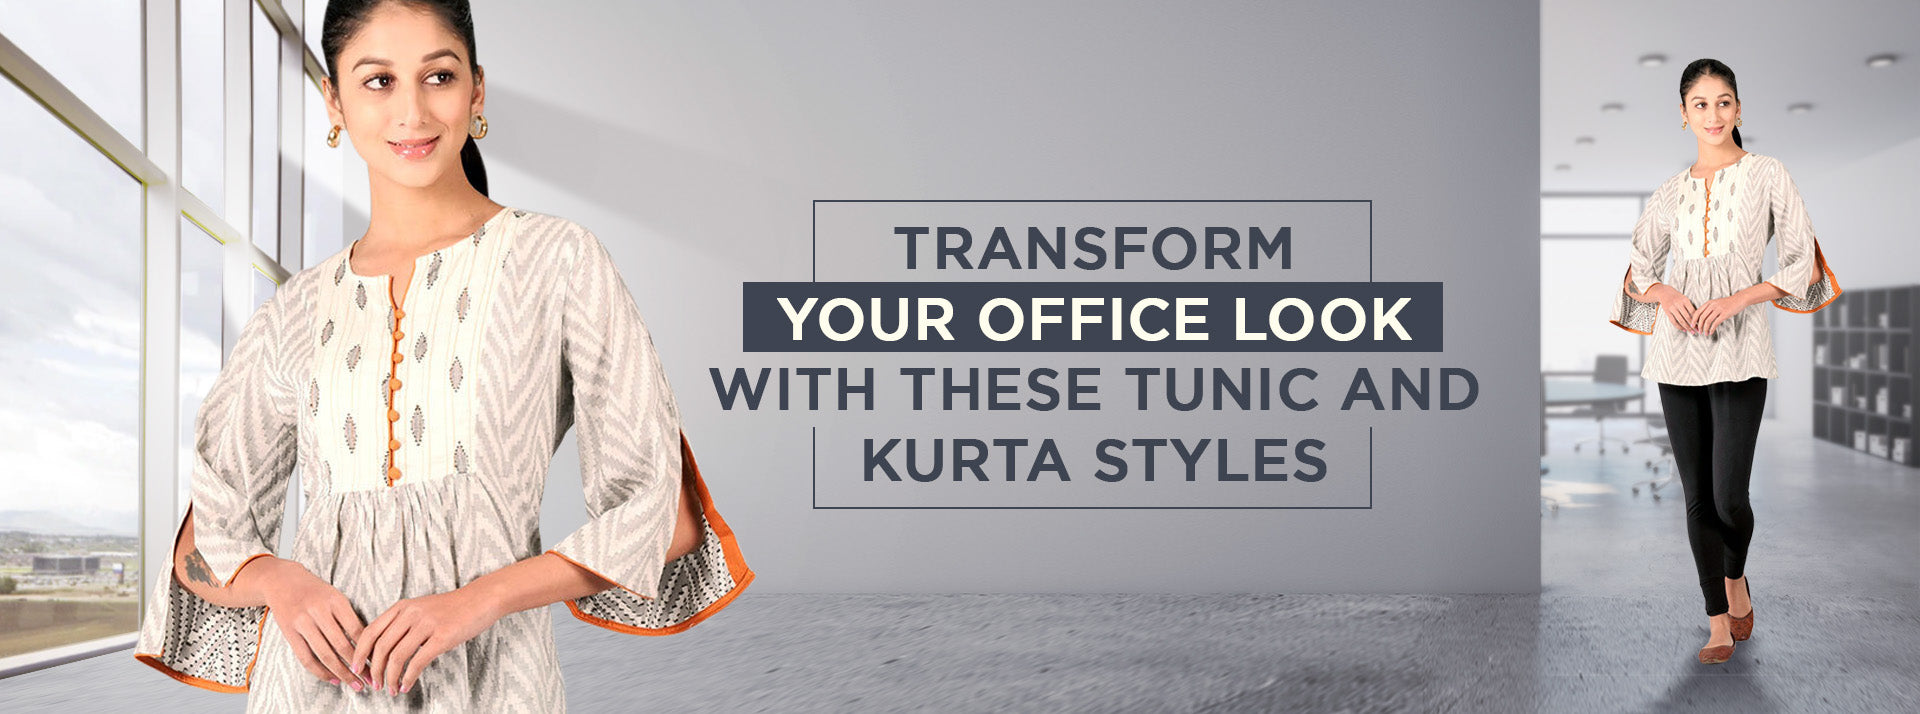 Transform Your Office Look with these Tunic and Kurta Styles